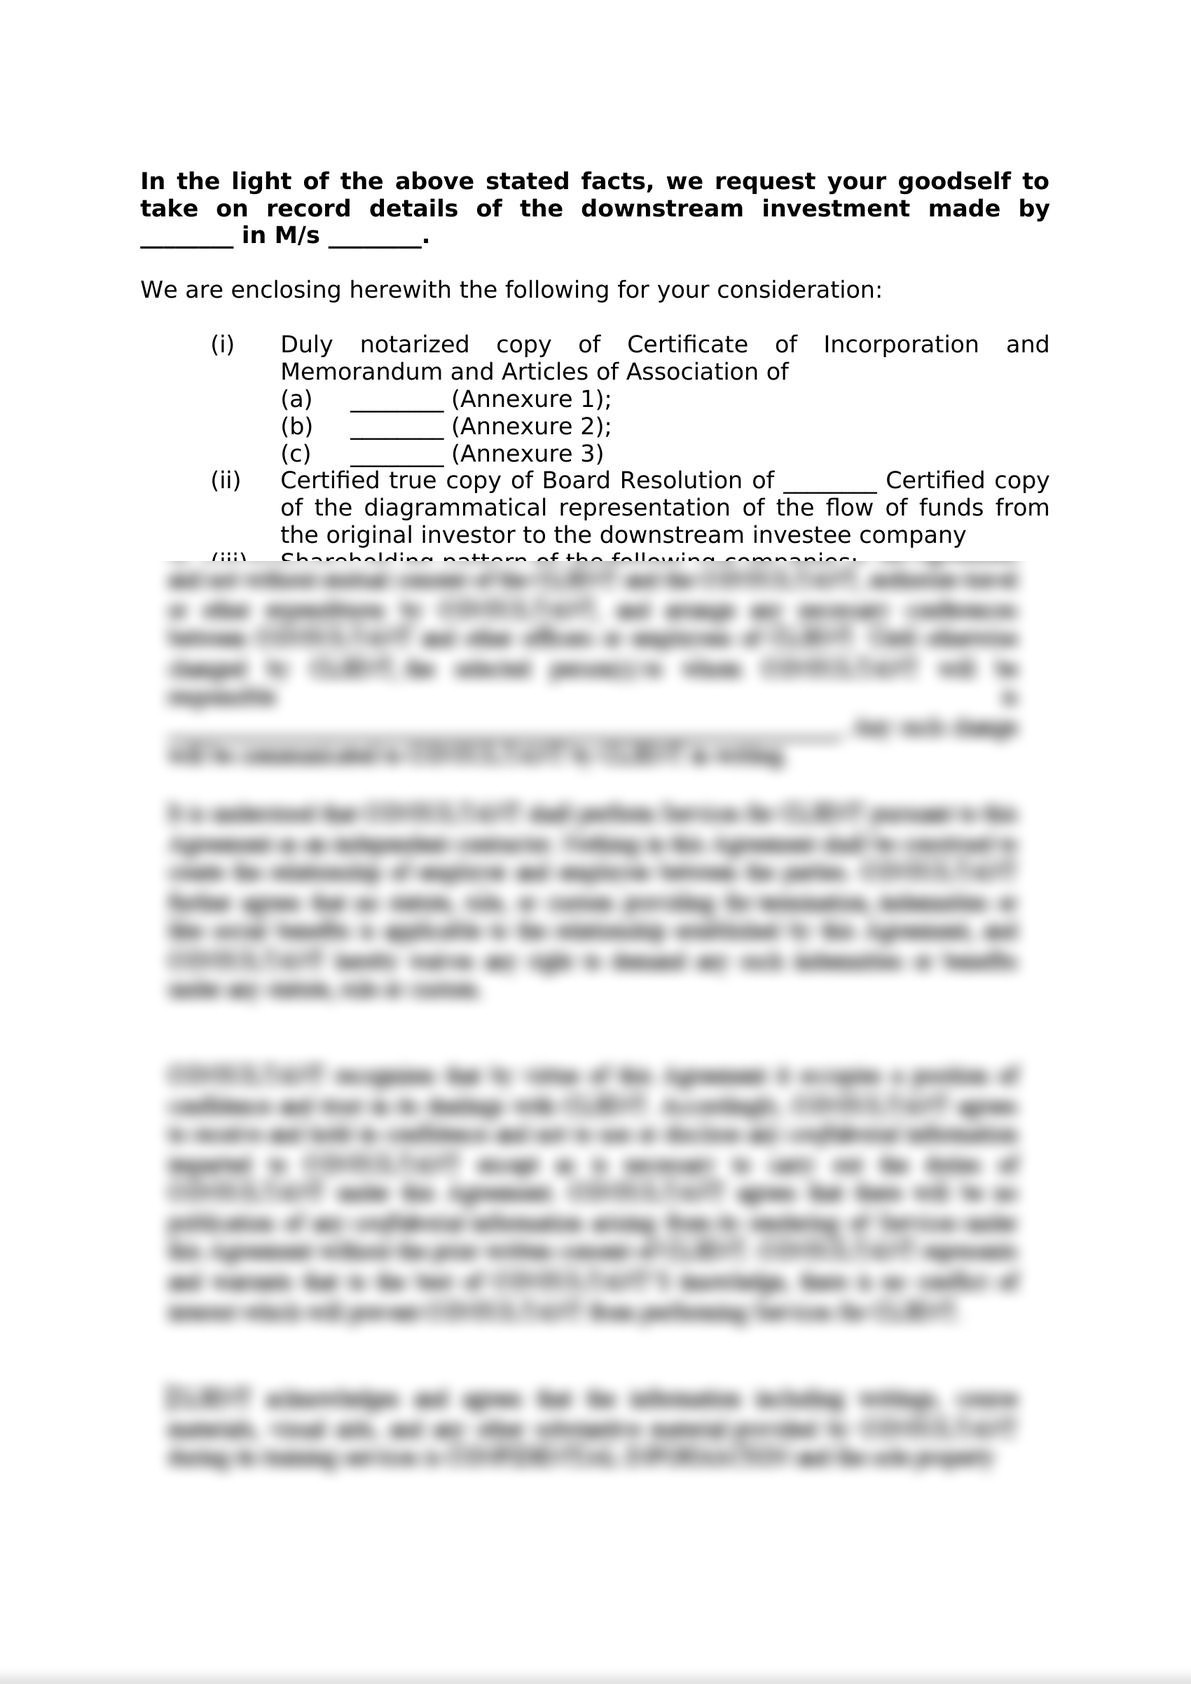 Application for intimation of Downstream Investment made by Holding  Company through its Subsidiary Company-2